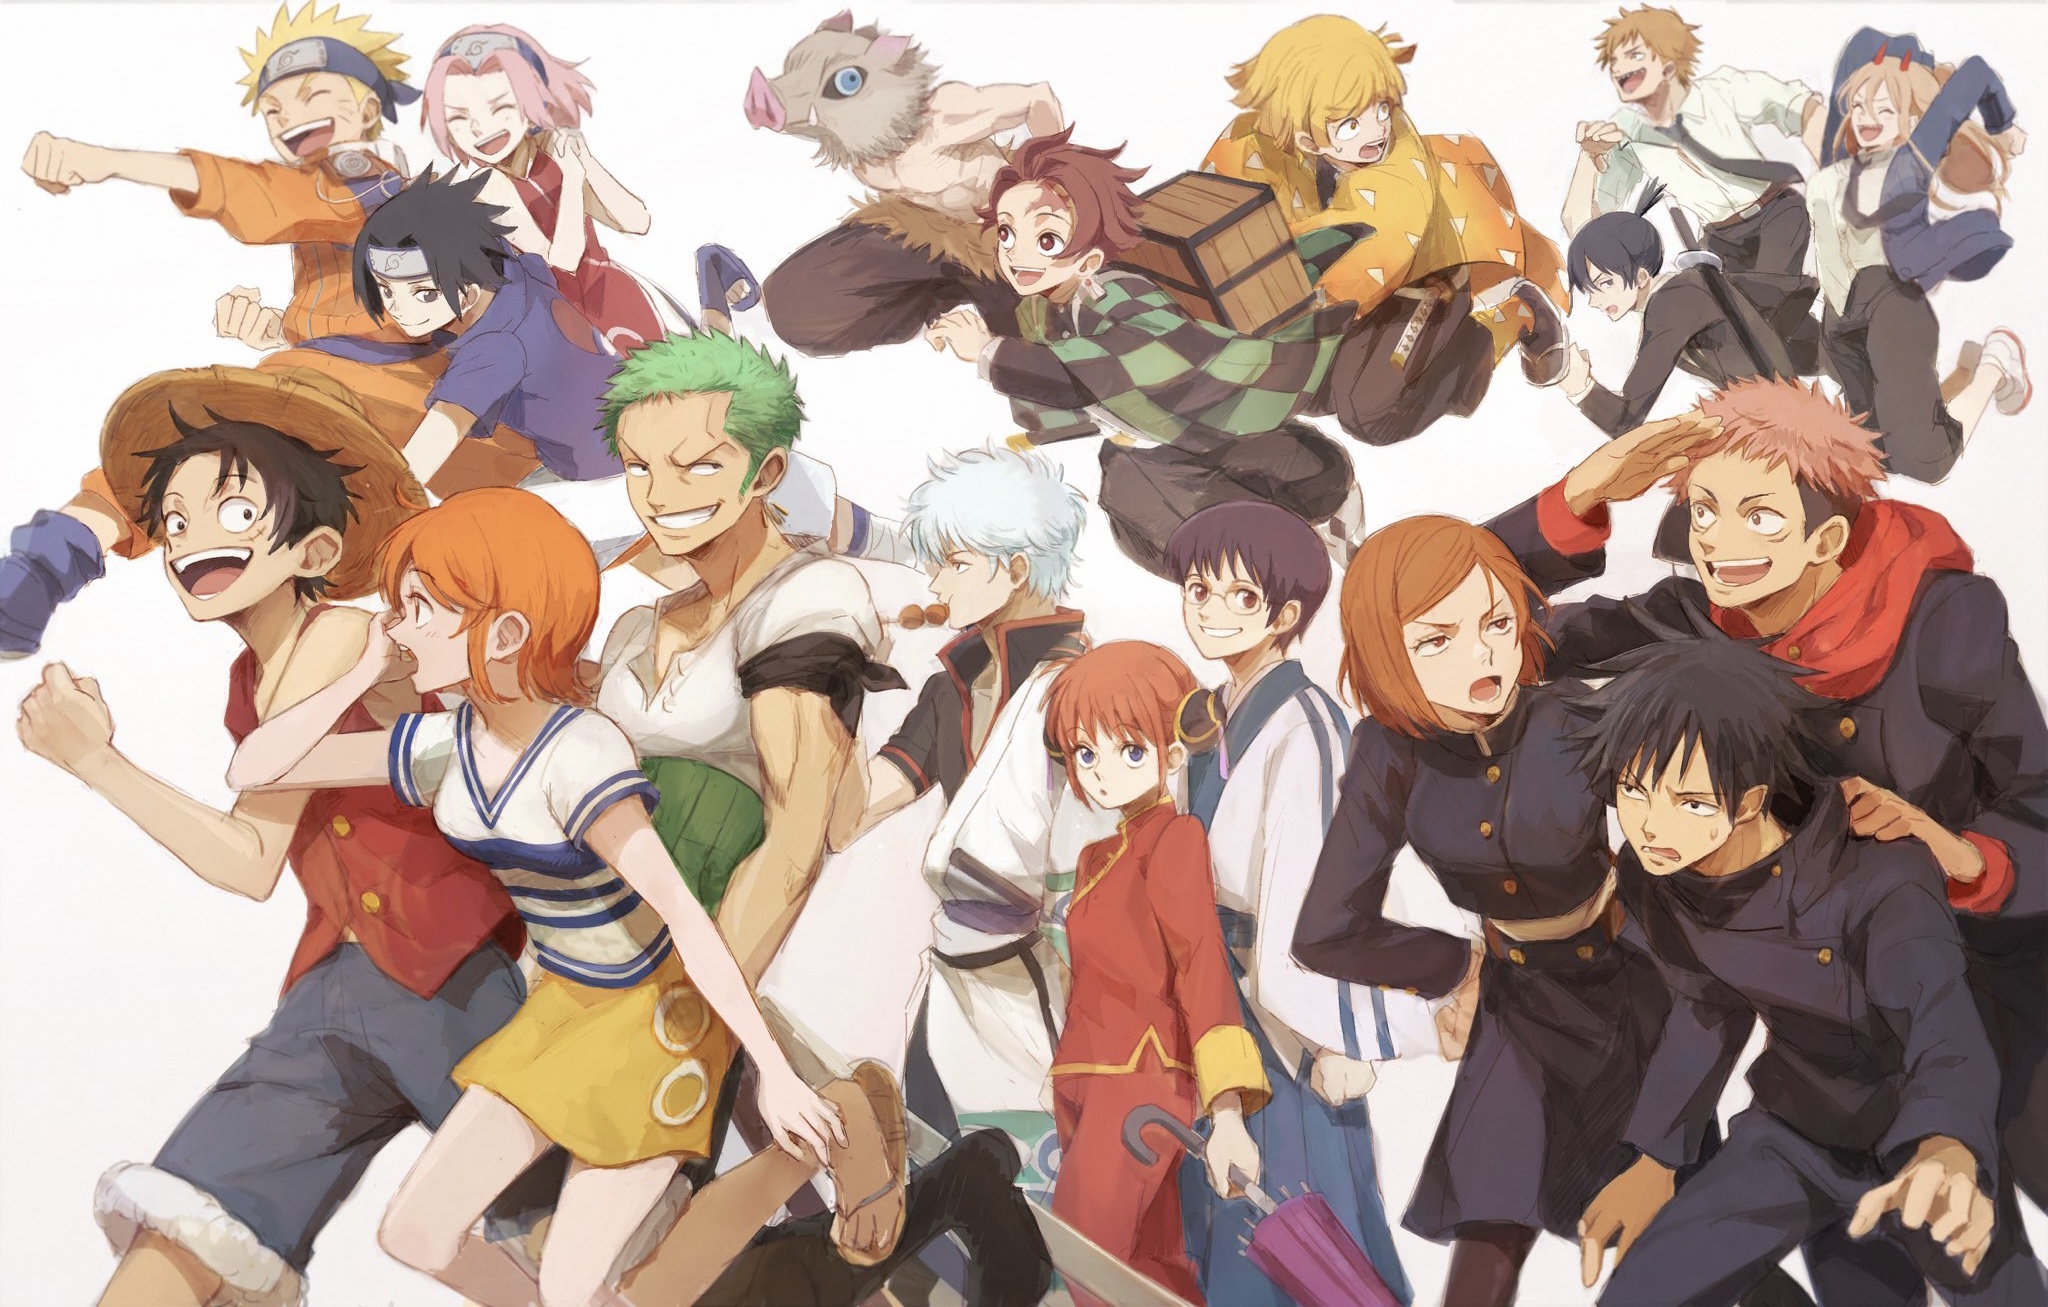 Anime Crossover HD Wallpaper by CHAKE